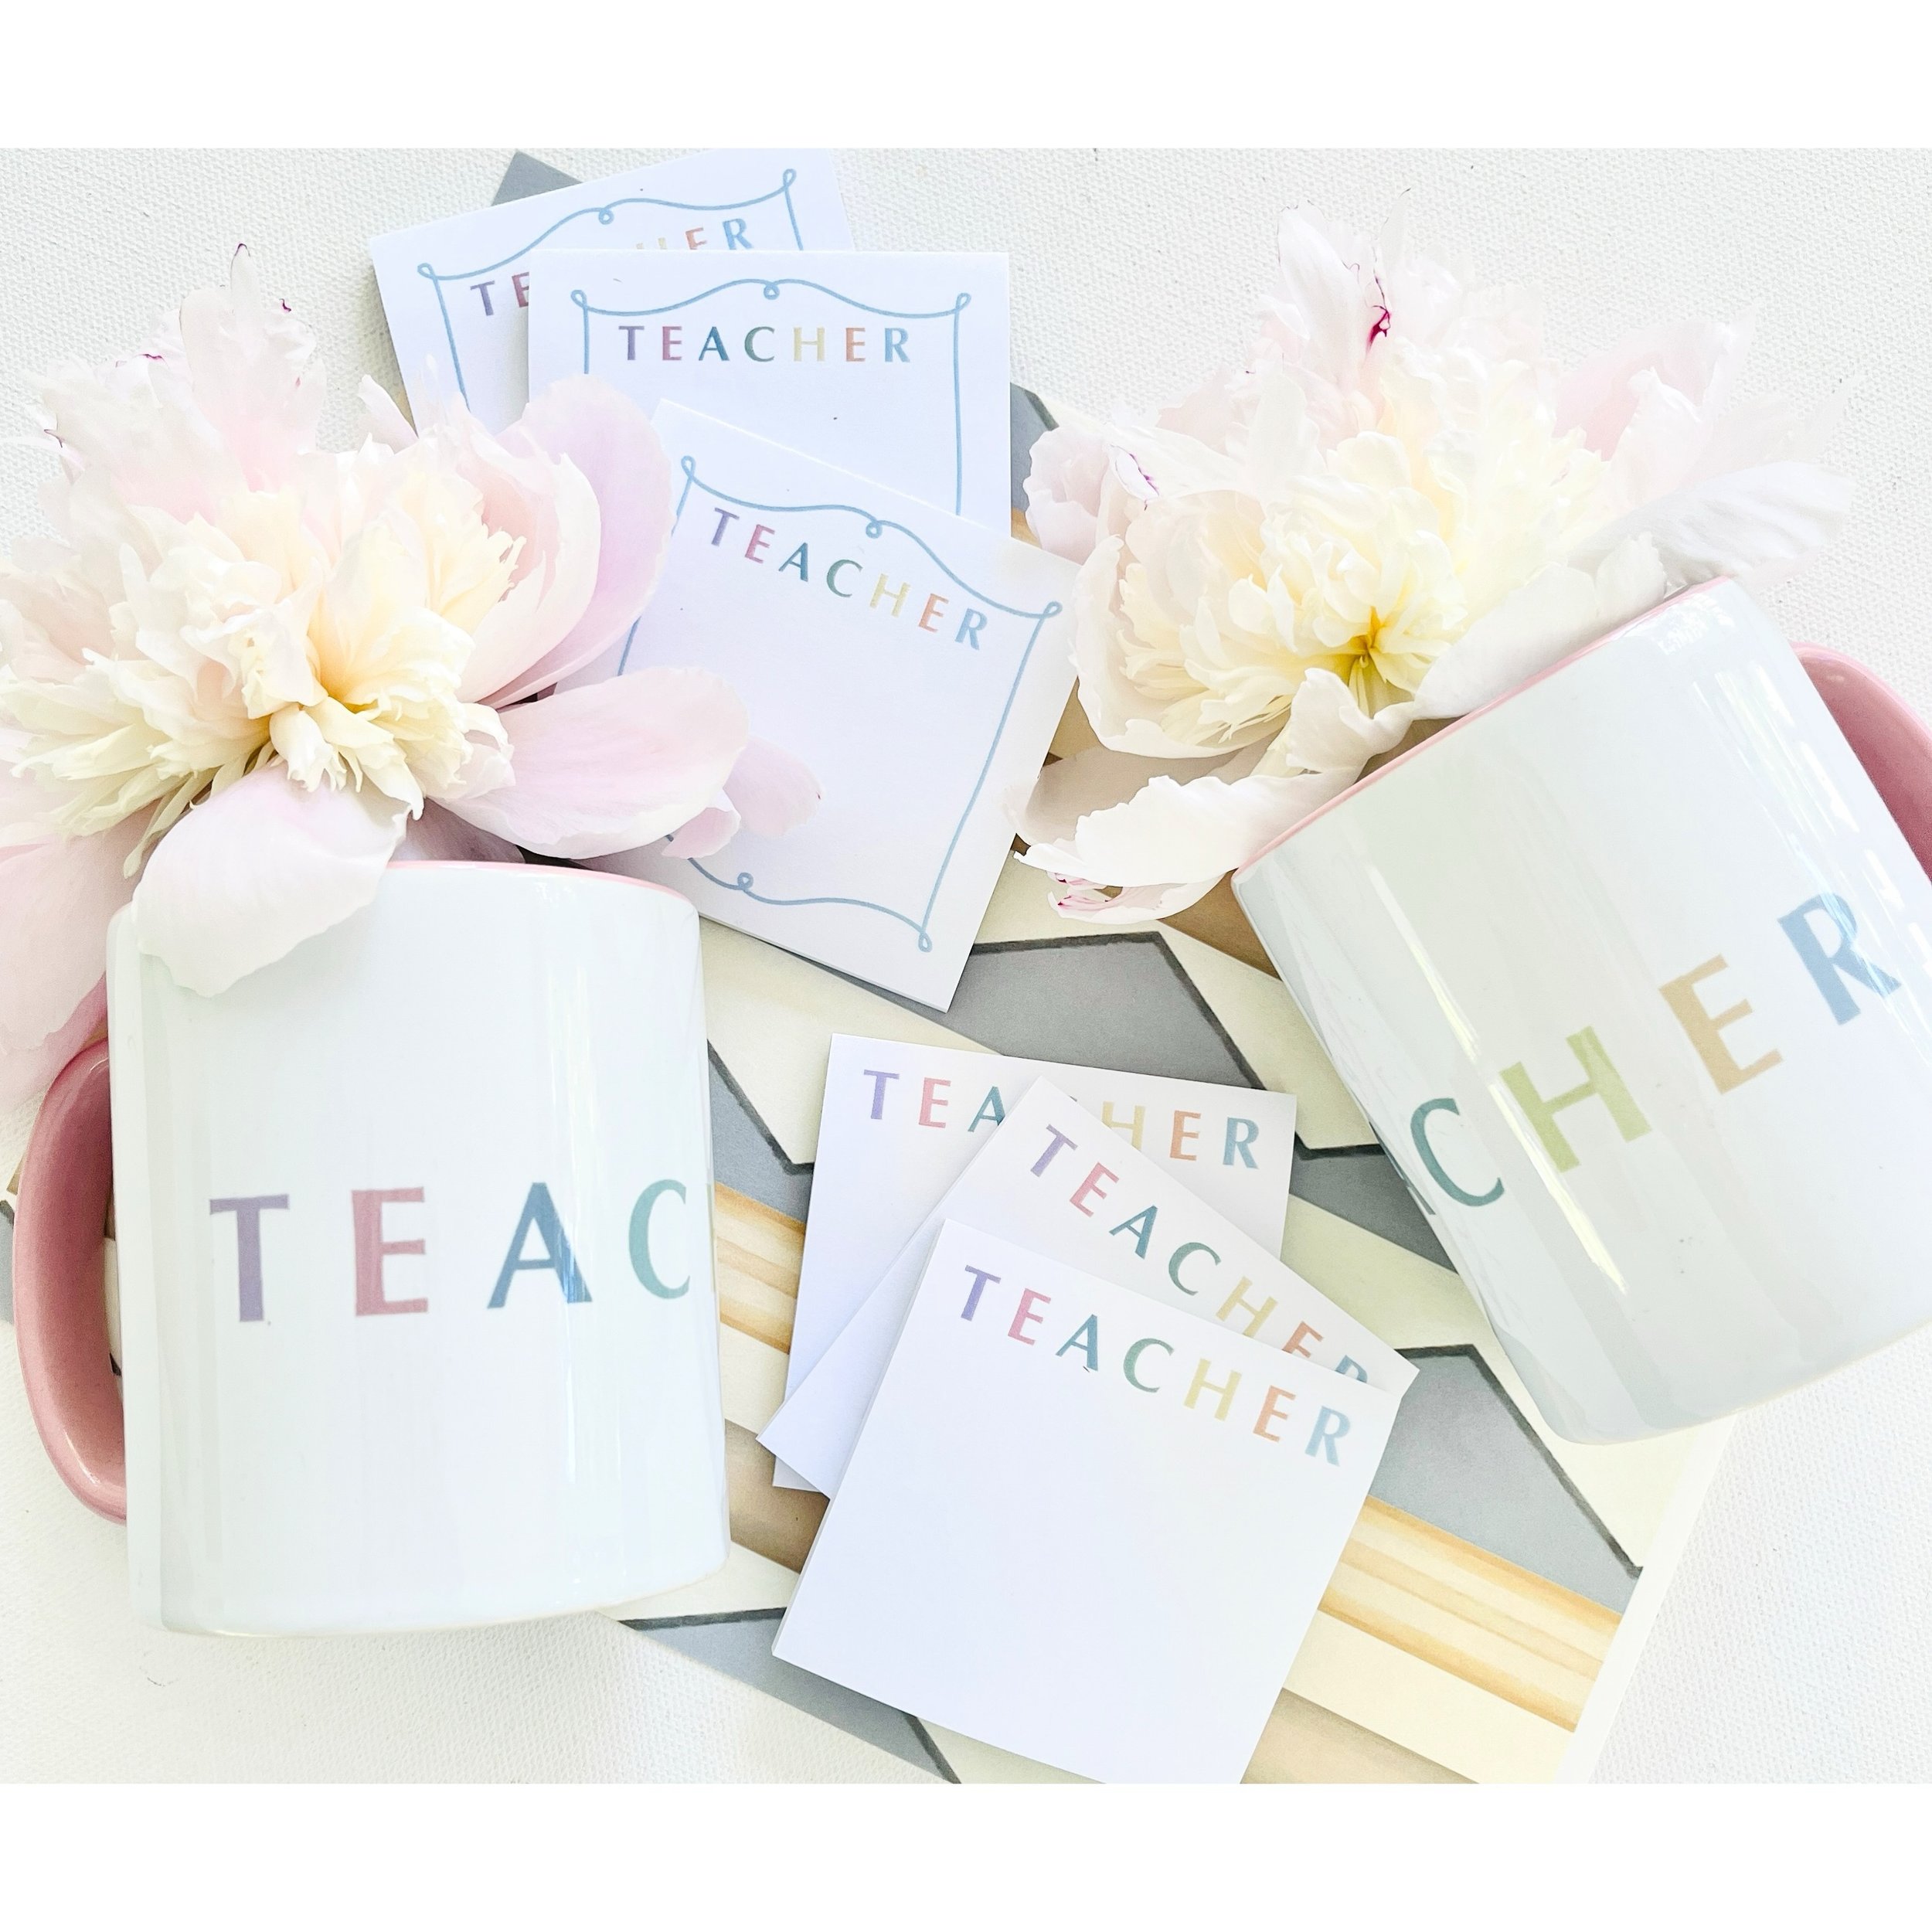 Shiny Happy Teacher Gifts 💛

A few notes on teacher gifts&hellip; 
There are a few more days to order custom notepads for May 31 delivery.
Sadly it&rsquo;s too late for Custom Notepads for May 24 delivery but still time for stationery, gift tags, et